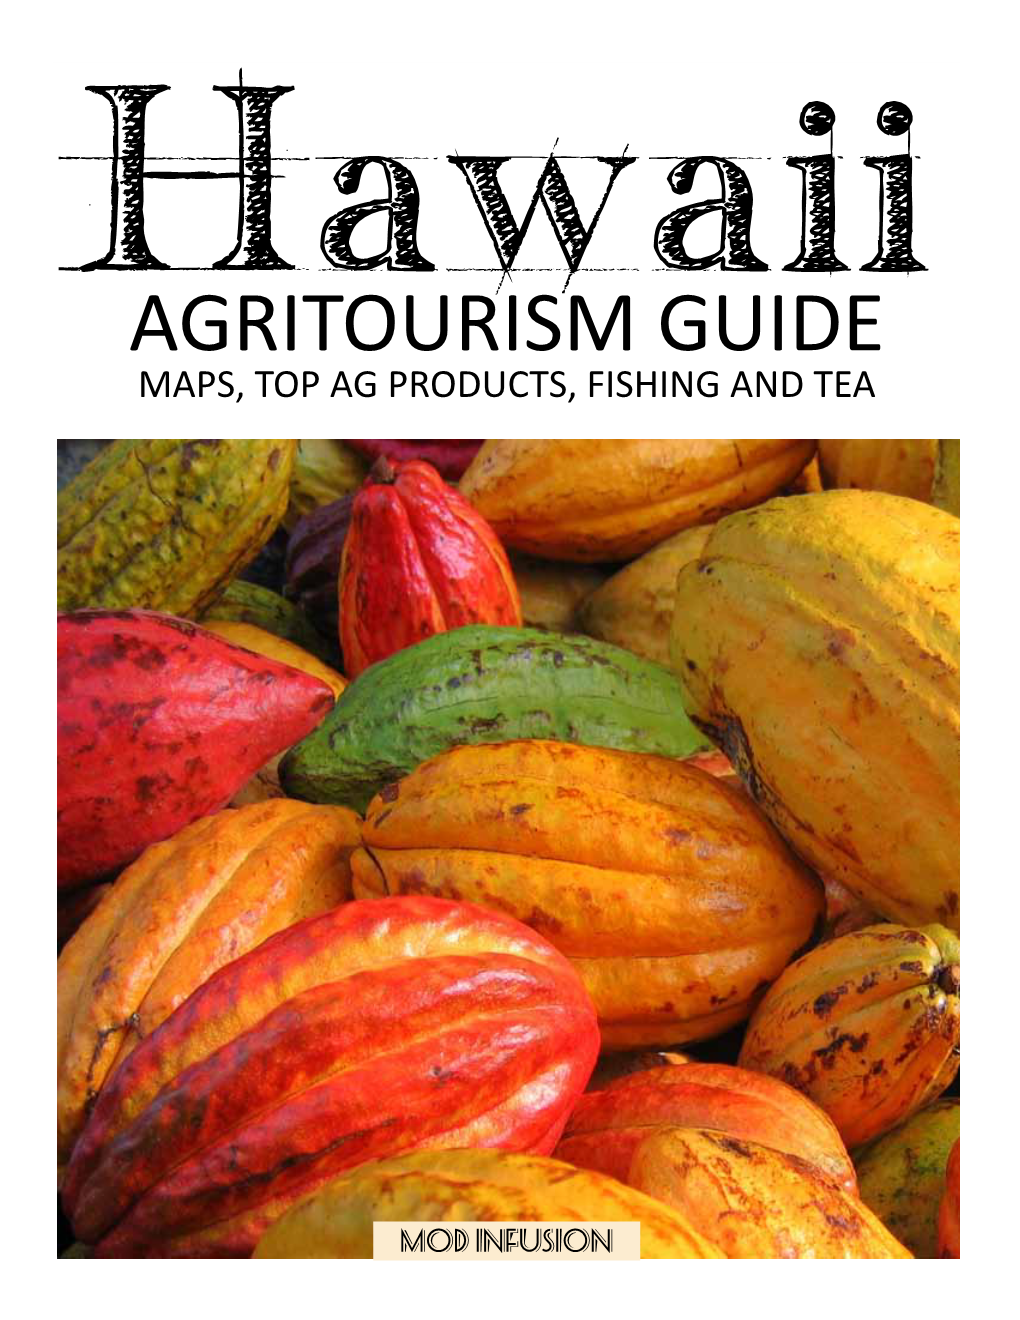 Agritourism Guide Maps, Top Ag Products, Fishing and Tea